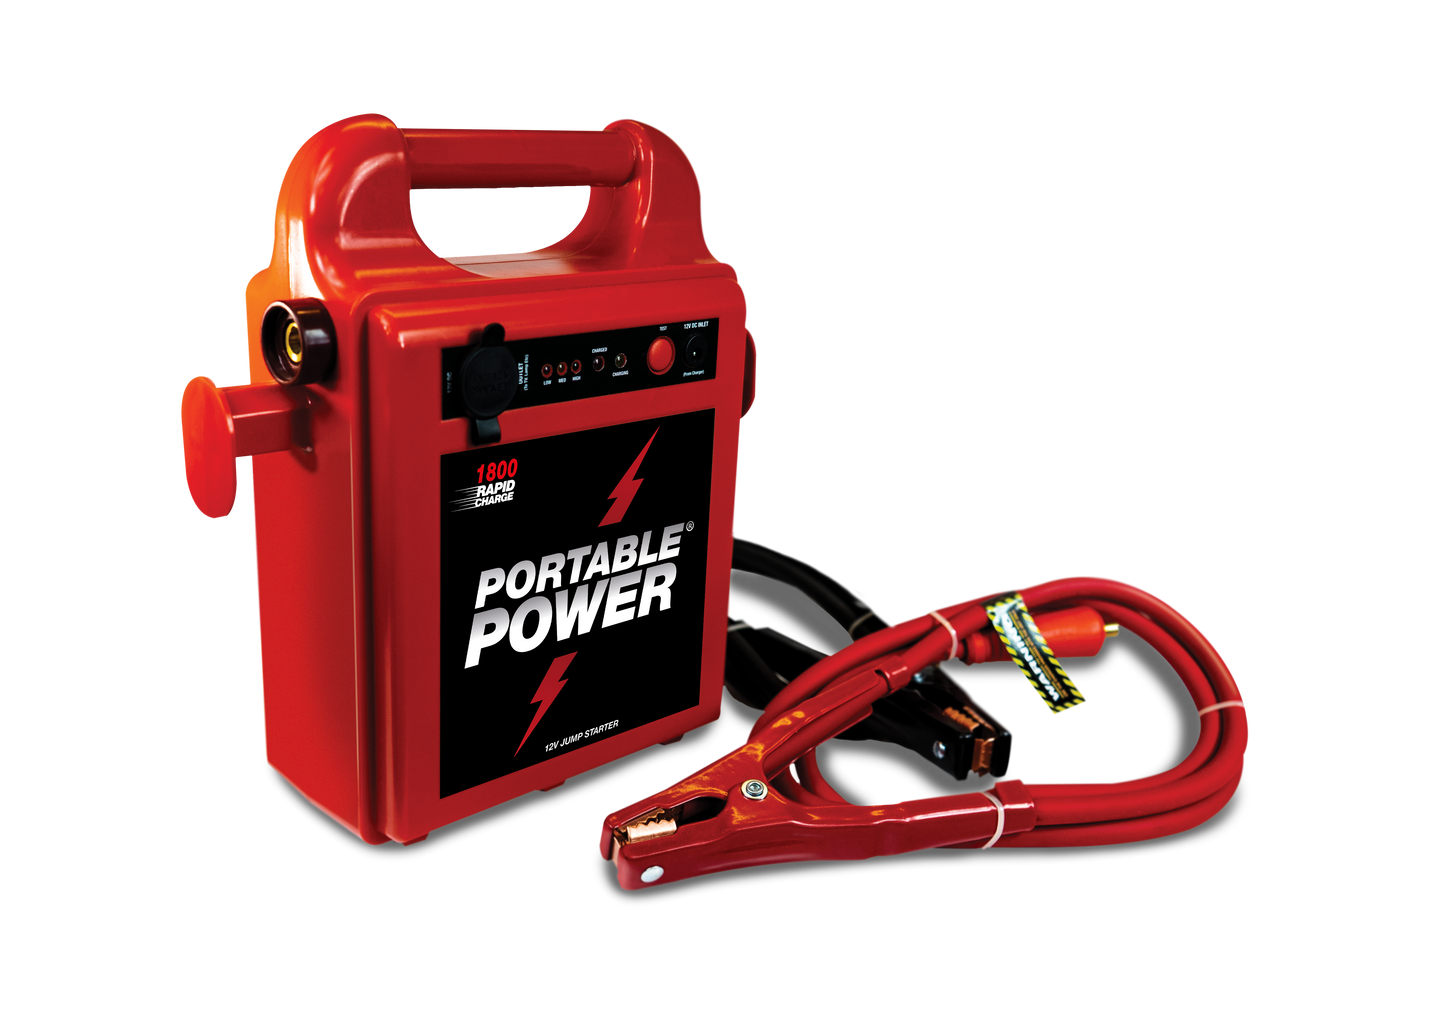 Portable Power Heavy Duty Rapid Charge 12v Battery Booster Jump Pack Single 1800RC 80Cm Leads